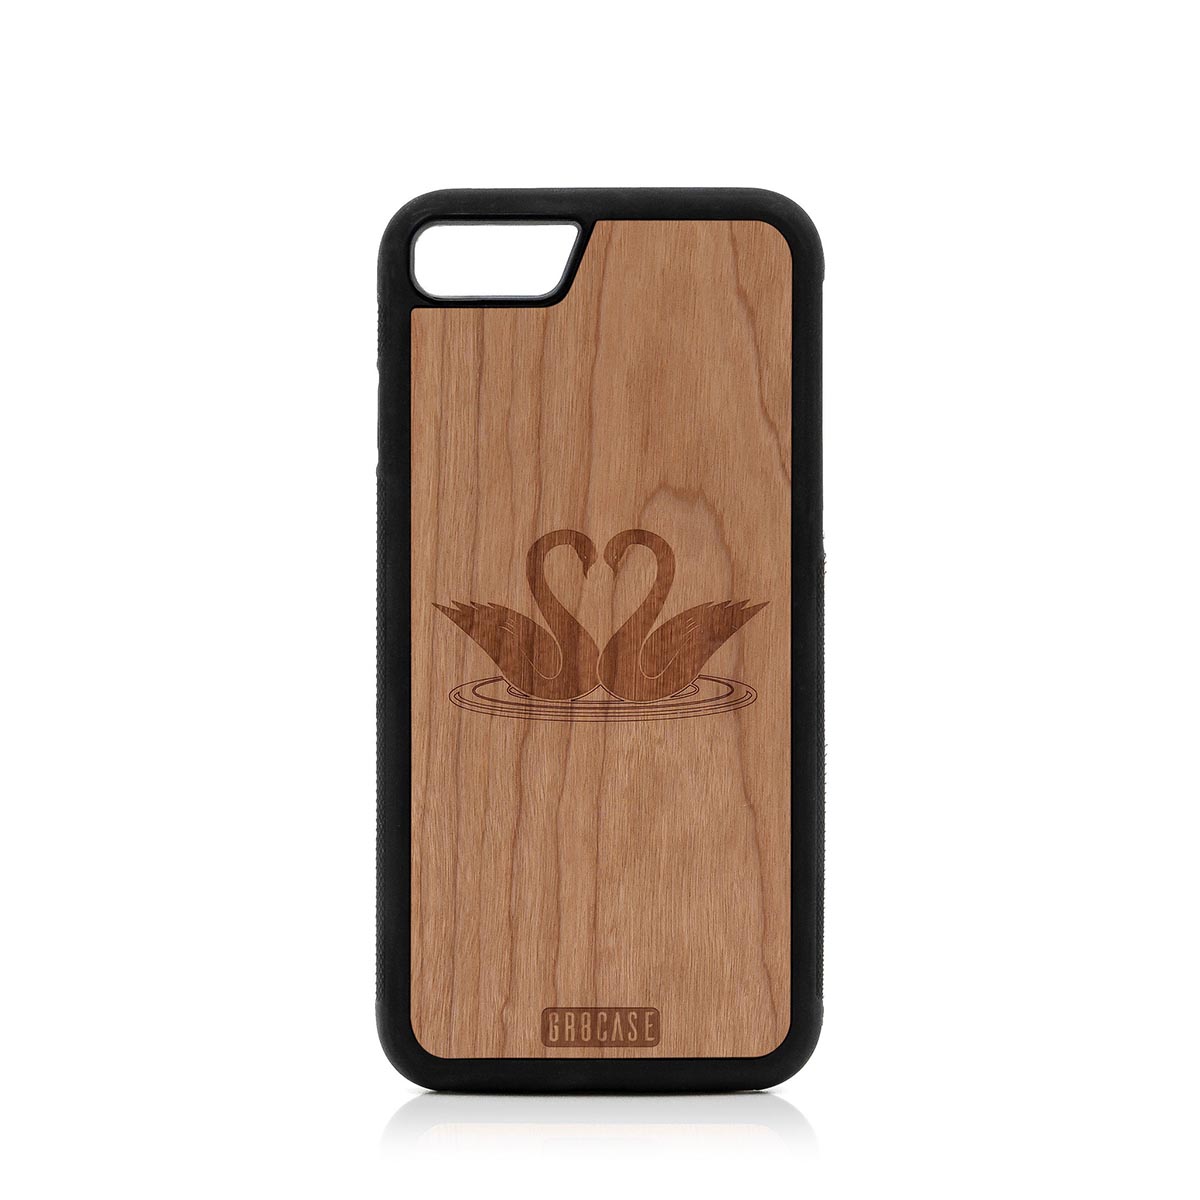 Swans Design Wood Case For iPhone 7/8